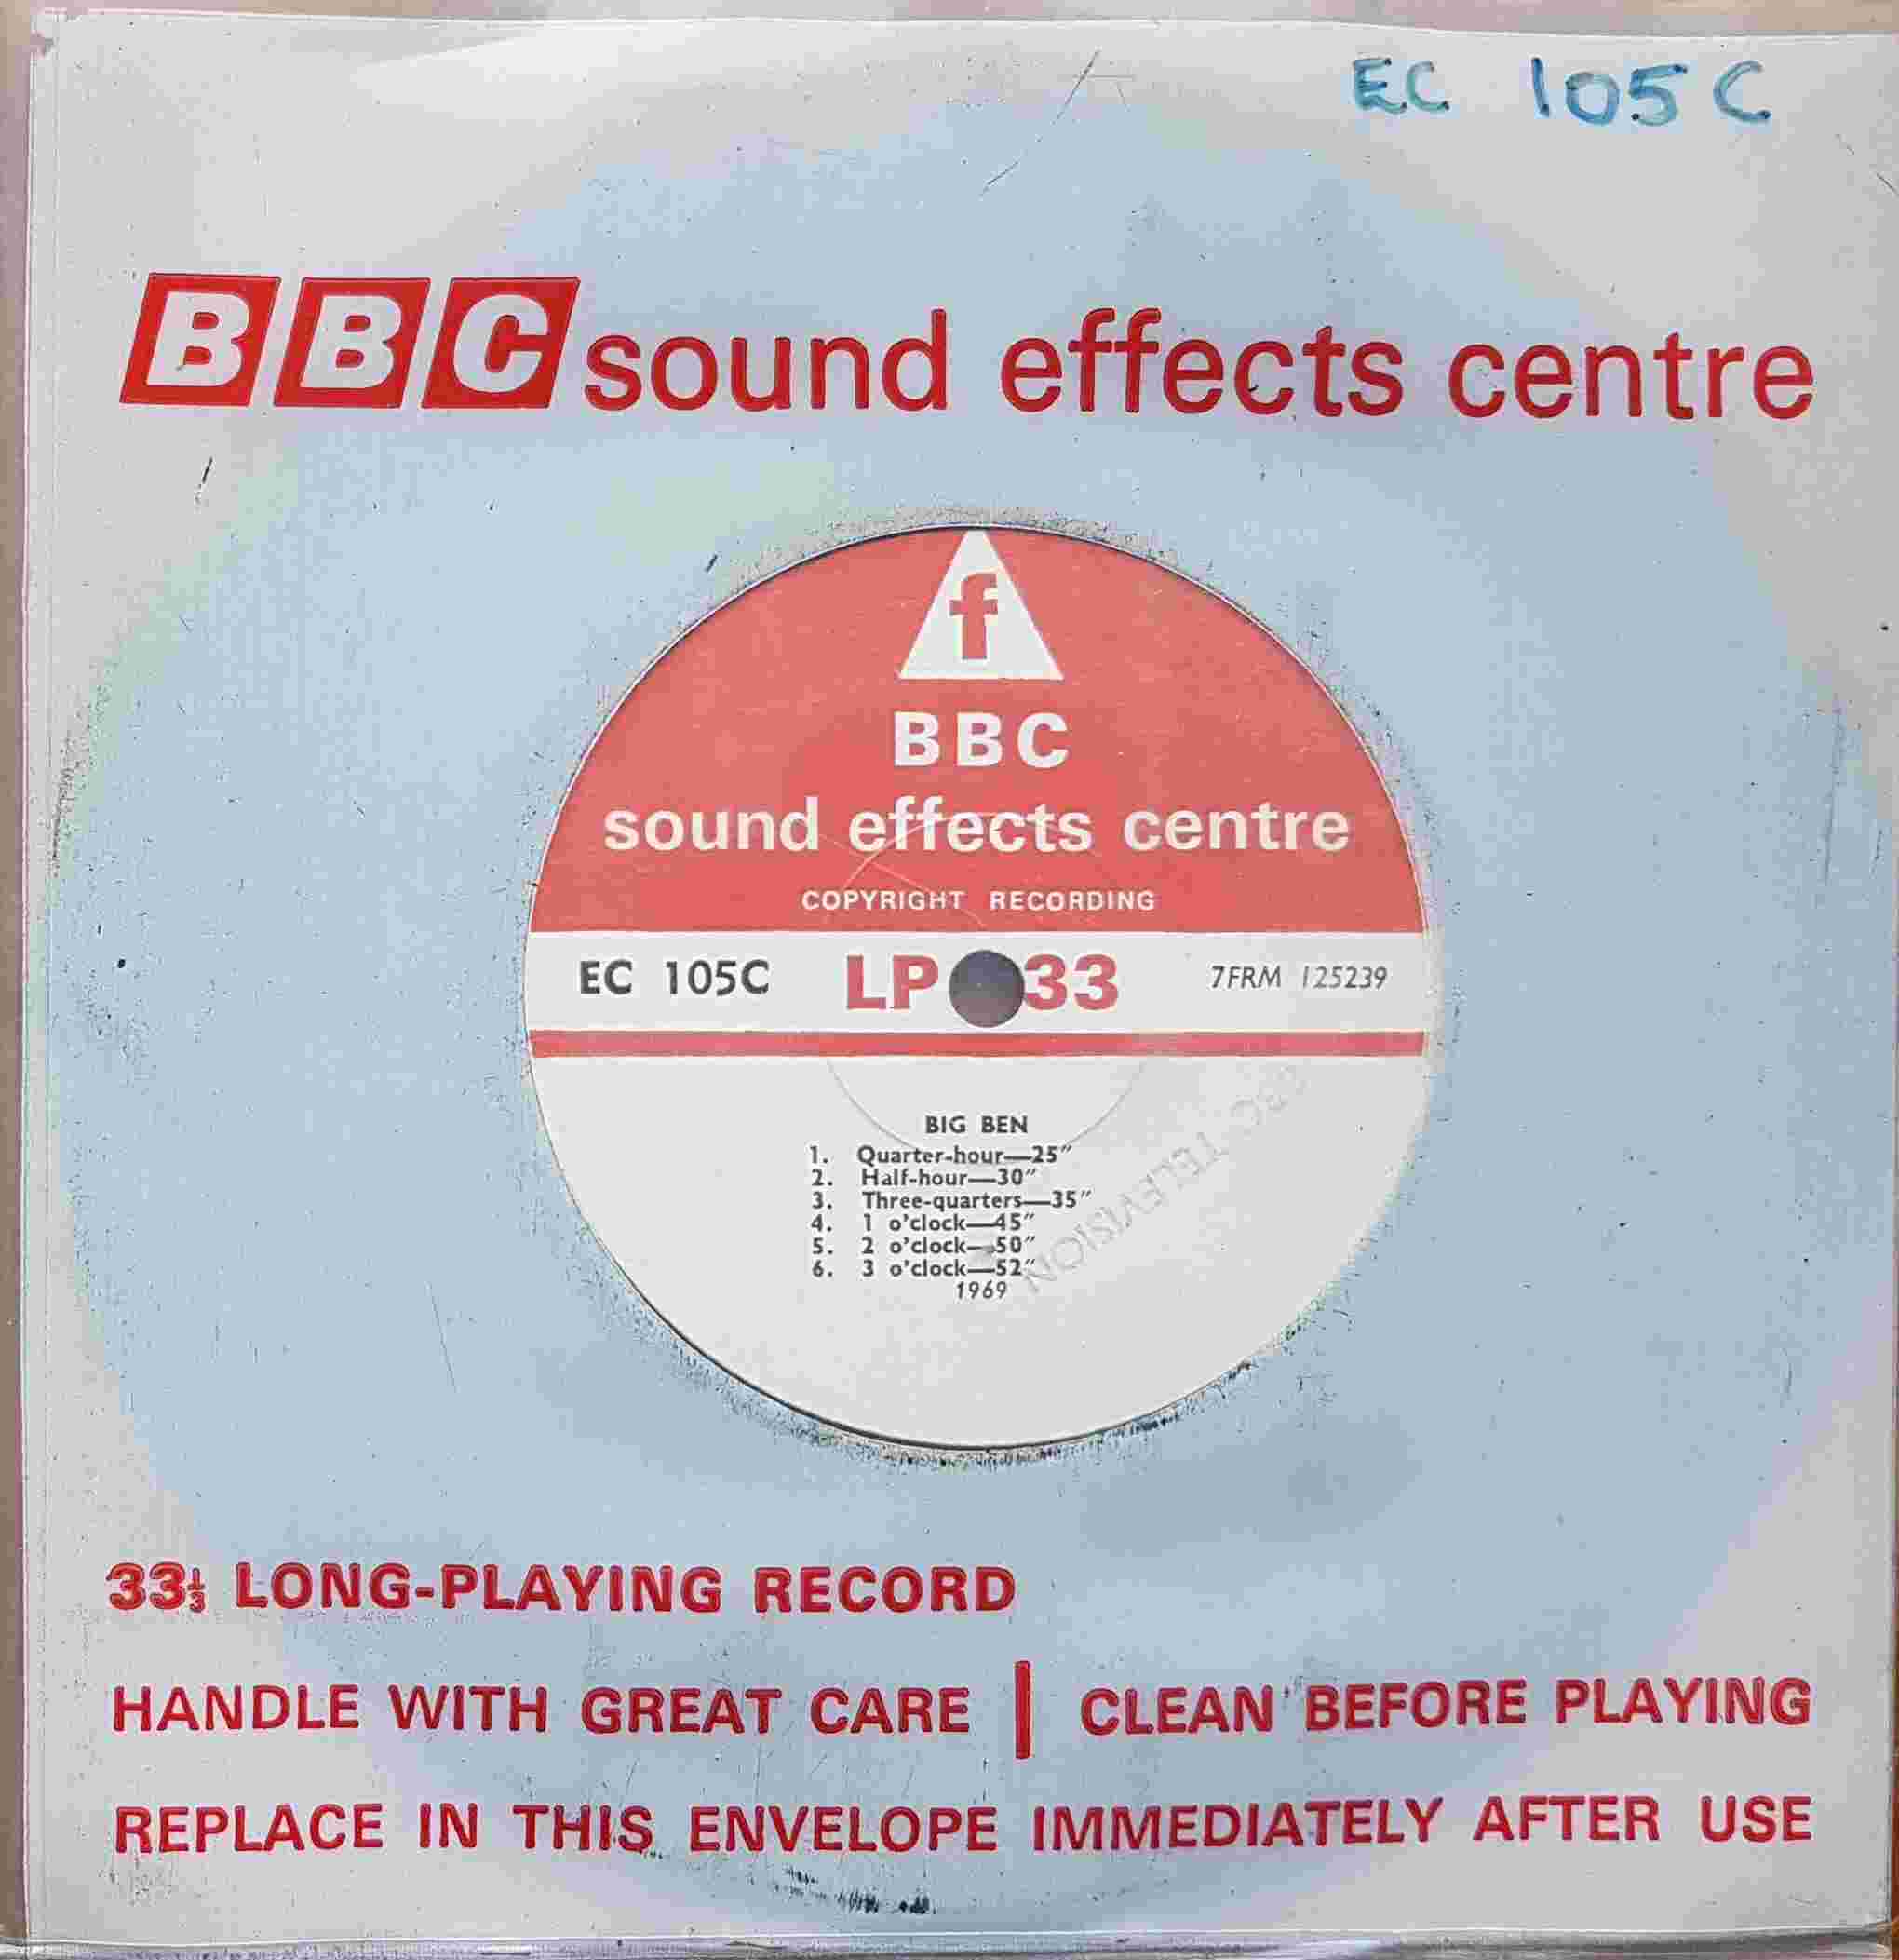 Picture of EC 105C Big Ben by artist Not registered from the BBC records and Tapes library